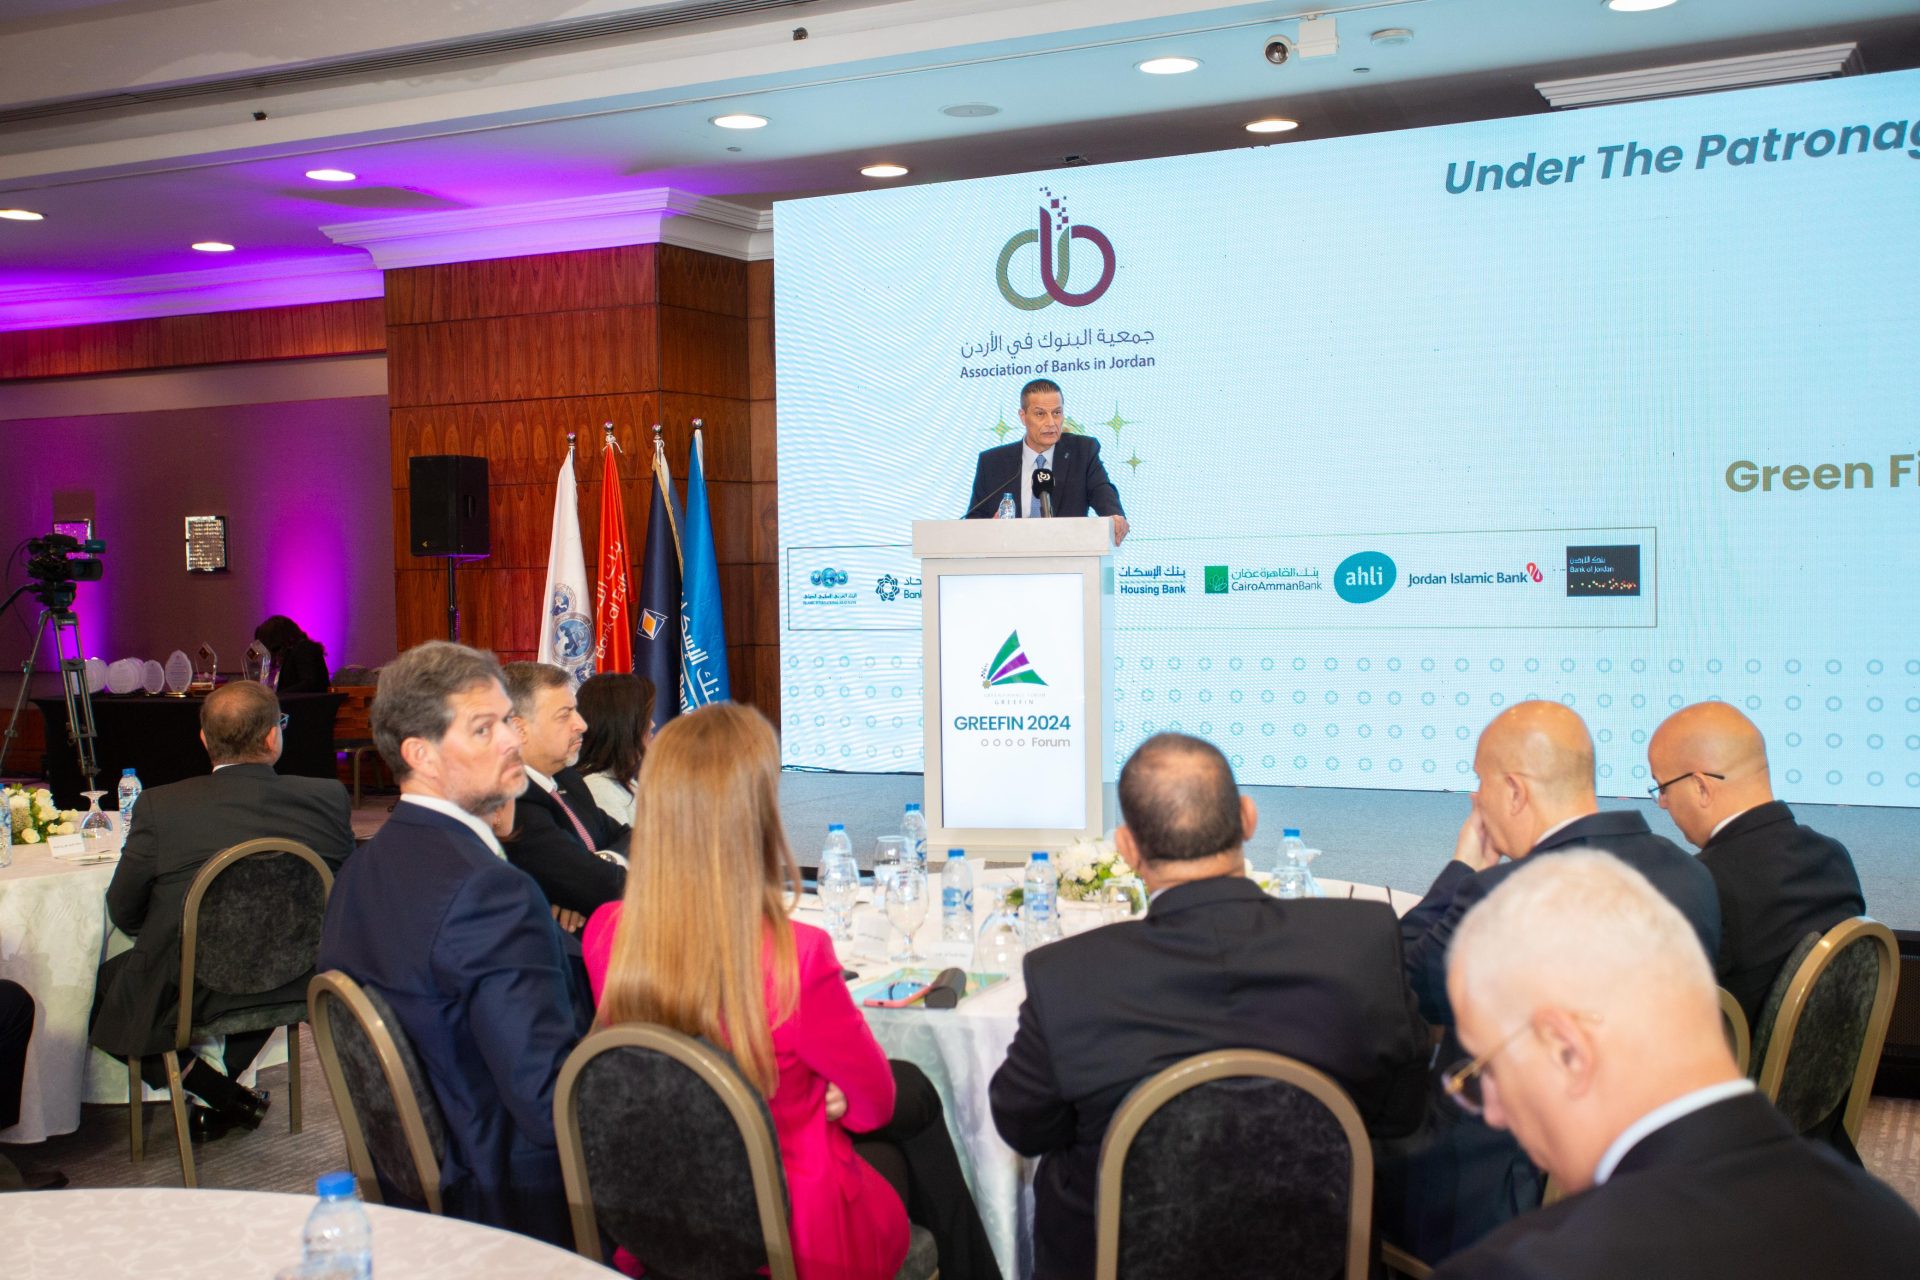 Under the patronage of the Governor of the Central Bank of Jordan, the Association of Banks in Jordan held the Green Finance Forum “GREEFIN 2024” titled “Green Finance: A Strategic Necessity for Banking’s Future”